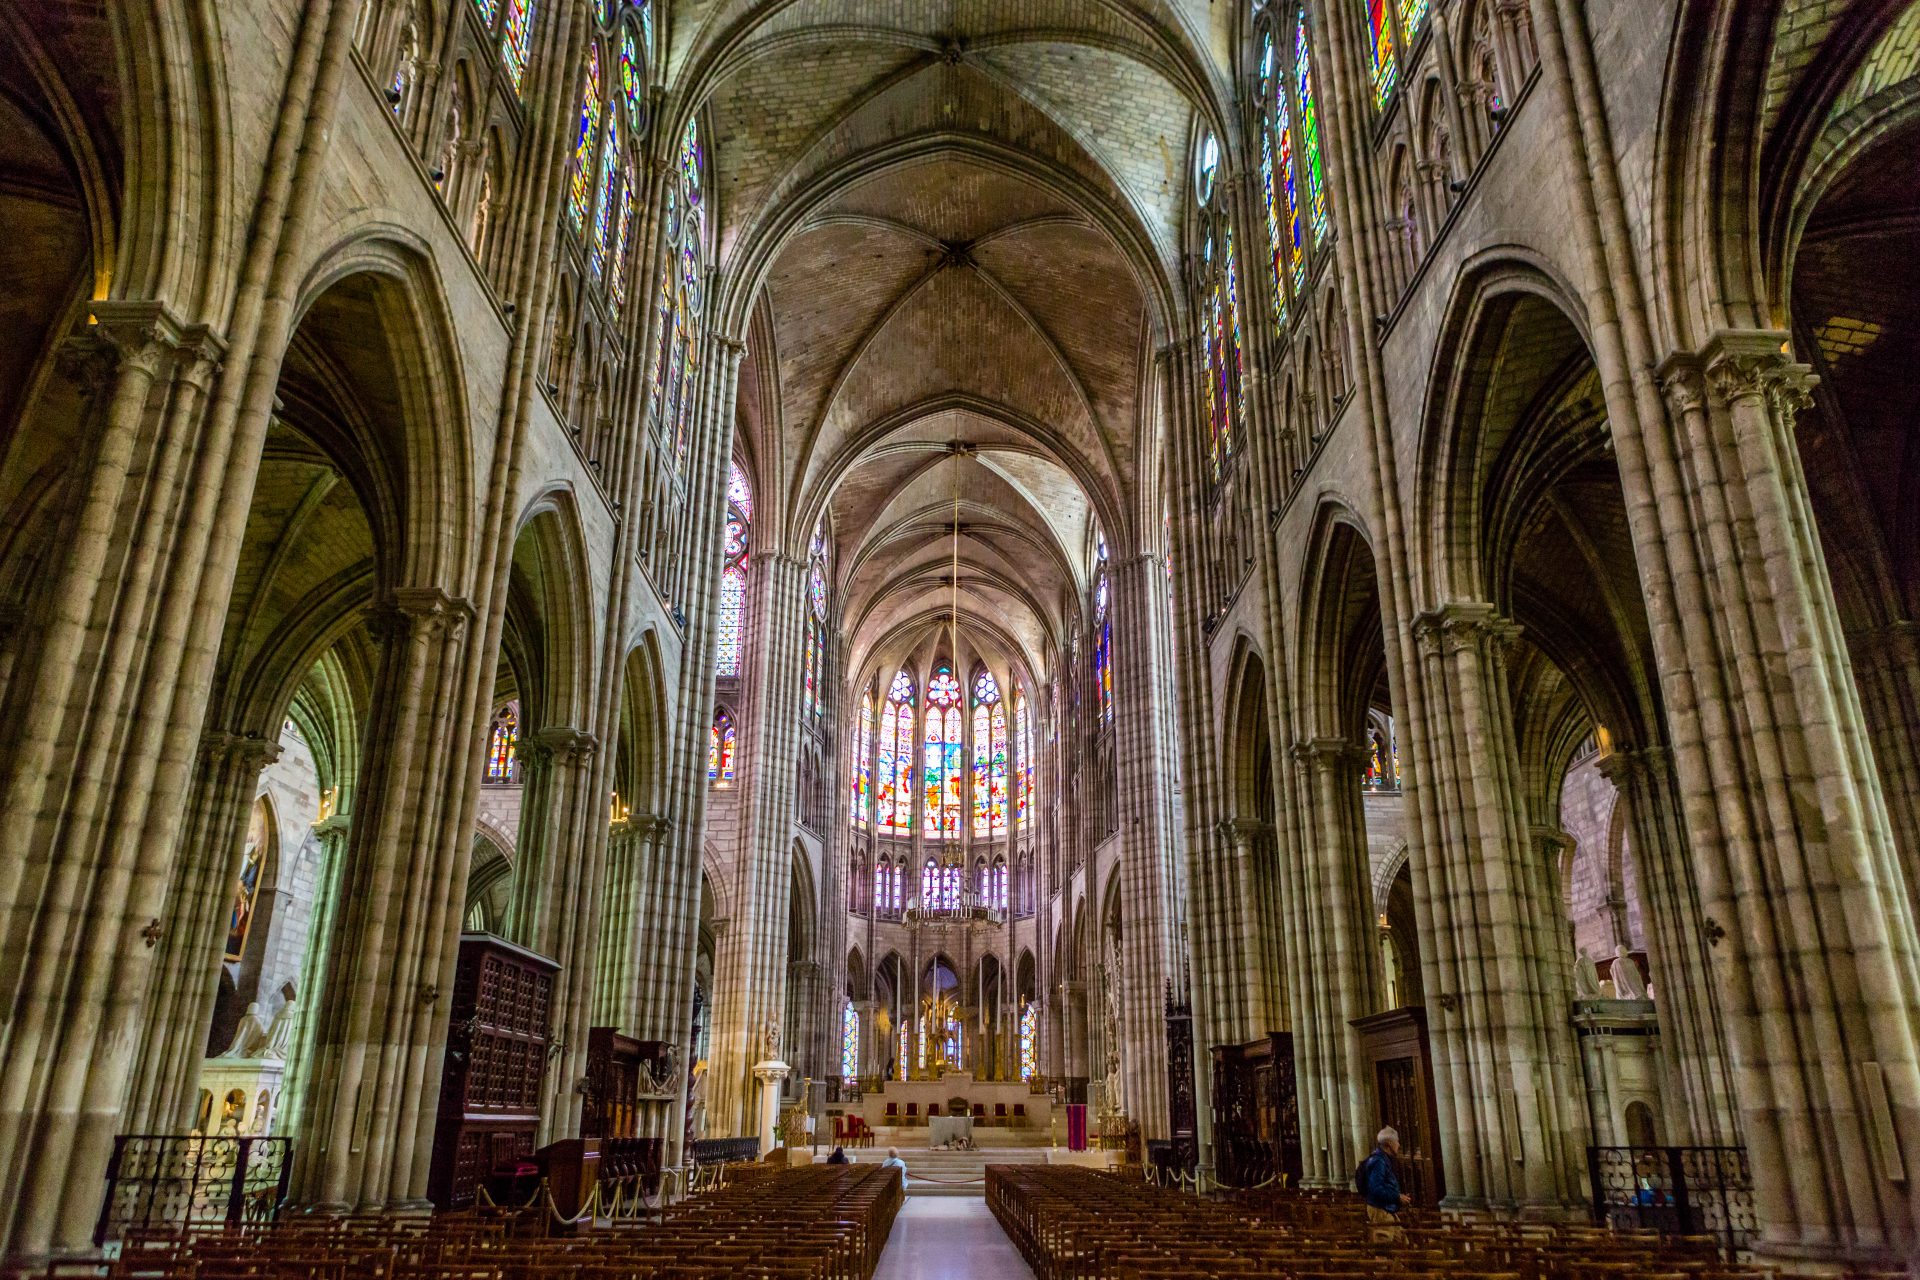 A new cathedral, inspired by the basilica of Saint-Denis